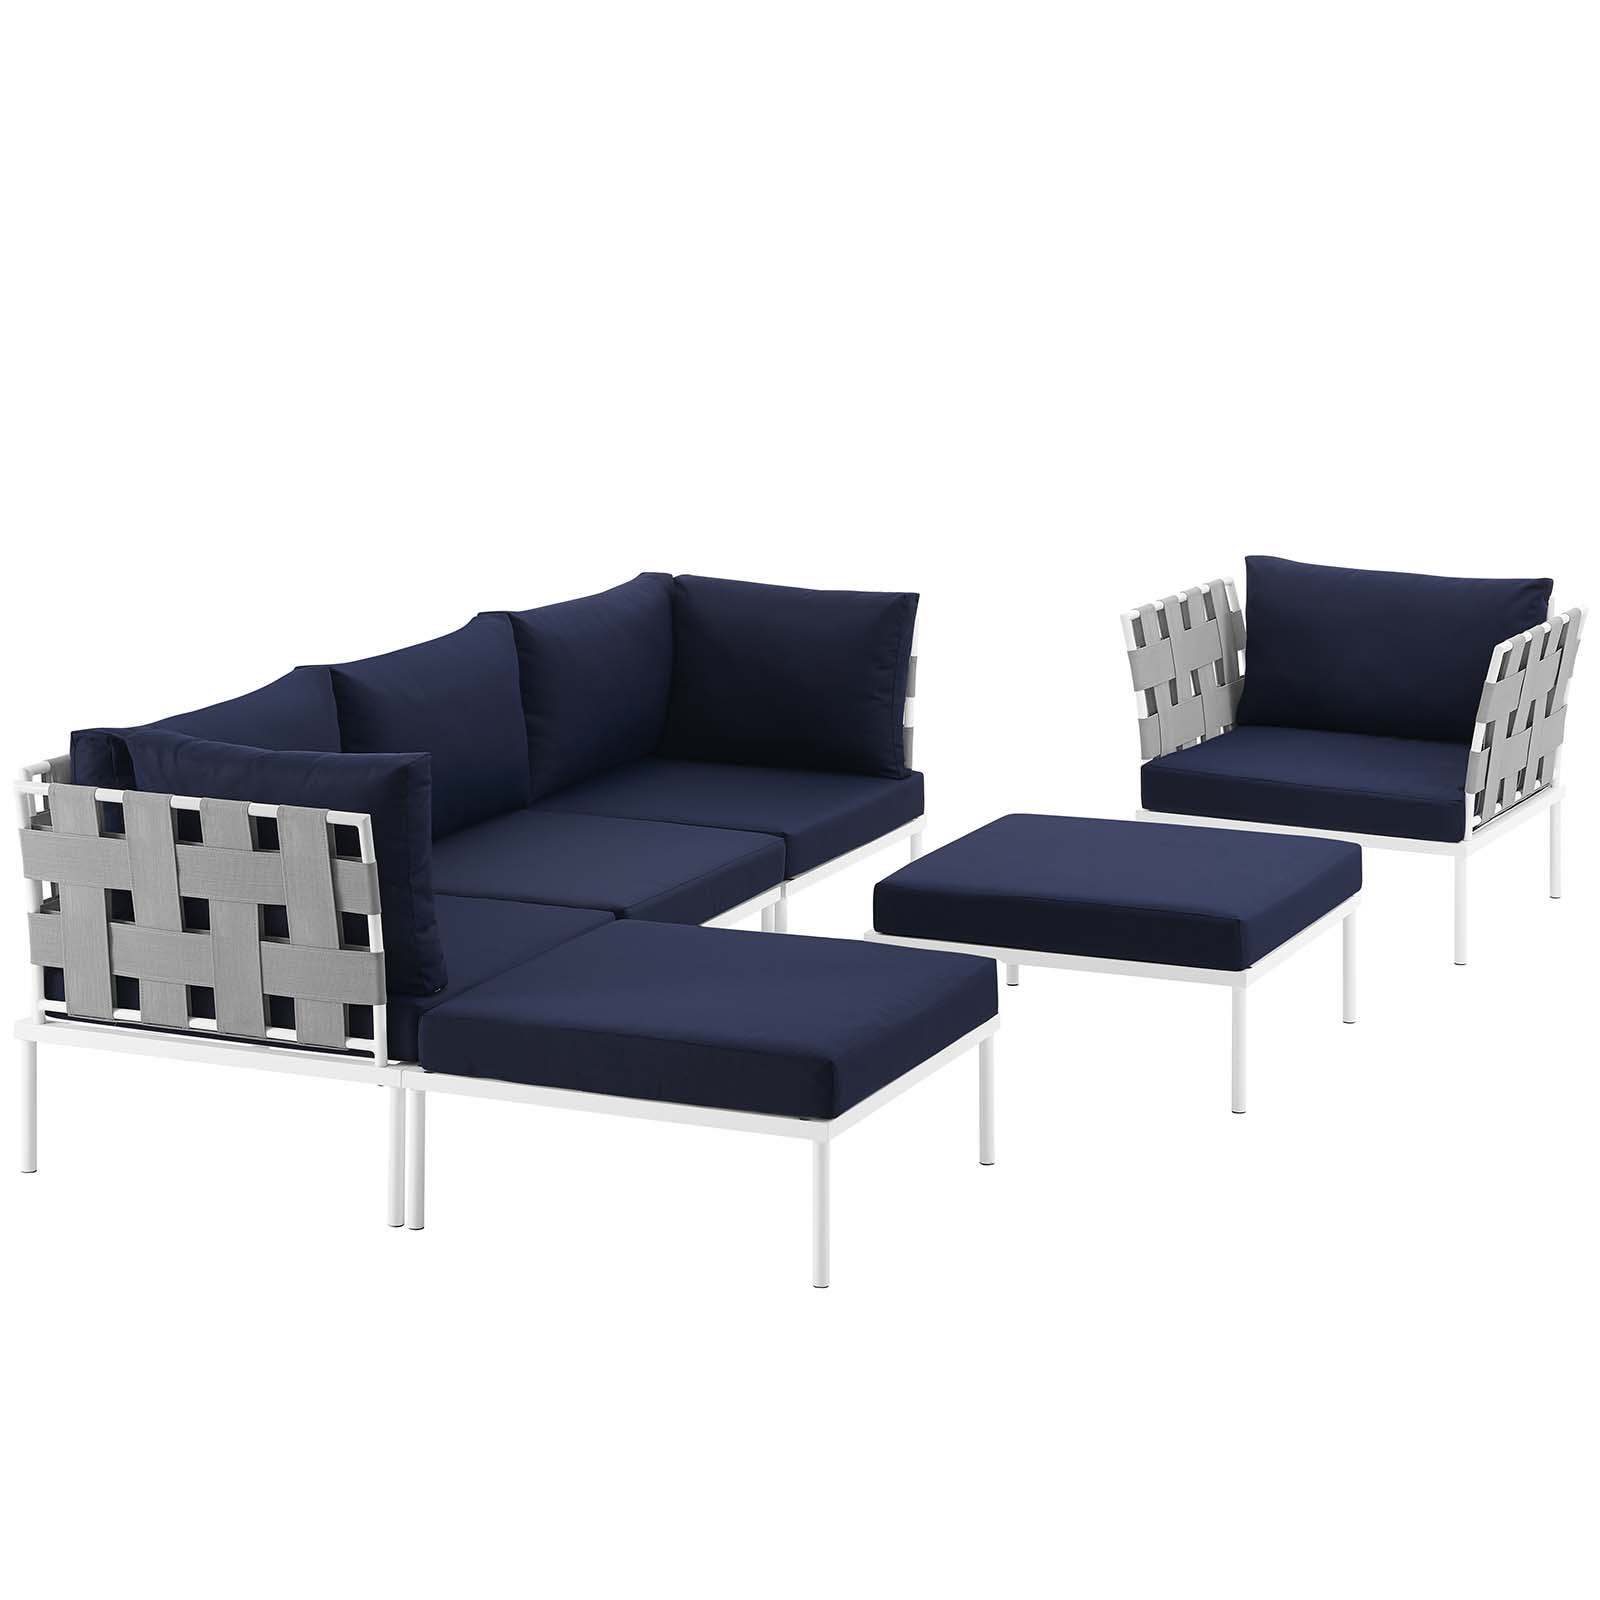 Modway Harmony 6 Piece Outdoor Patio Aluminum Sectional Sofa Set in White Navy - image 2 of 8